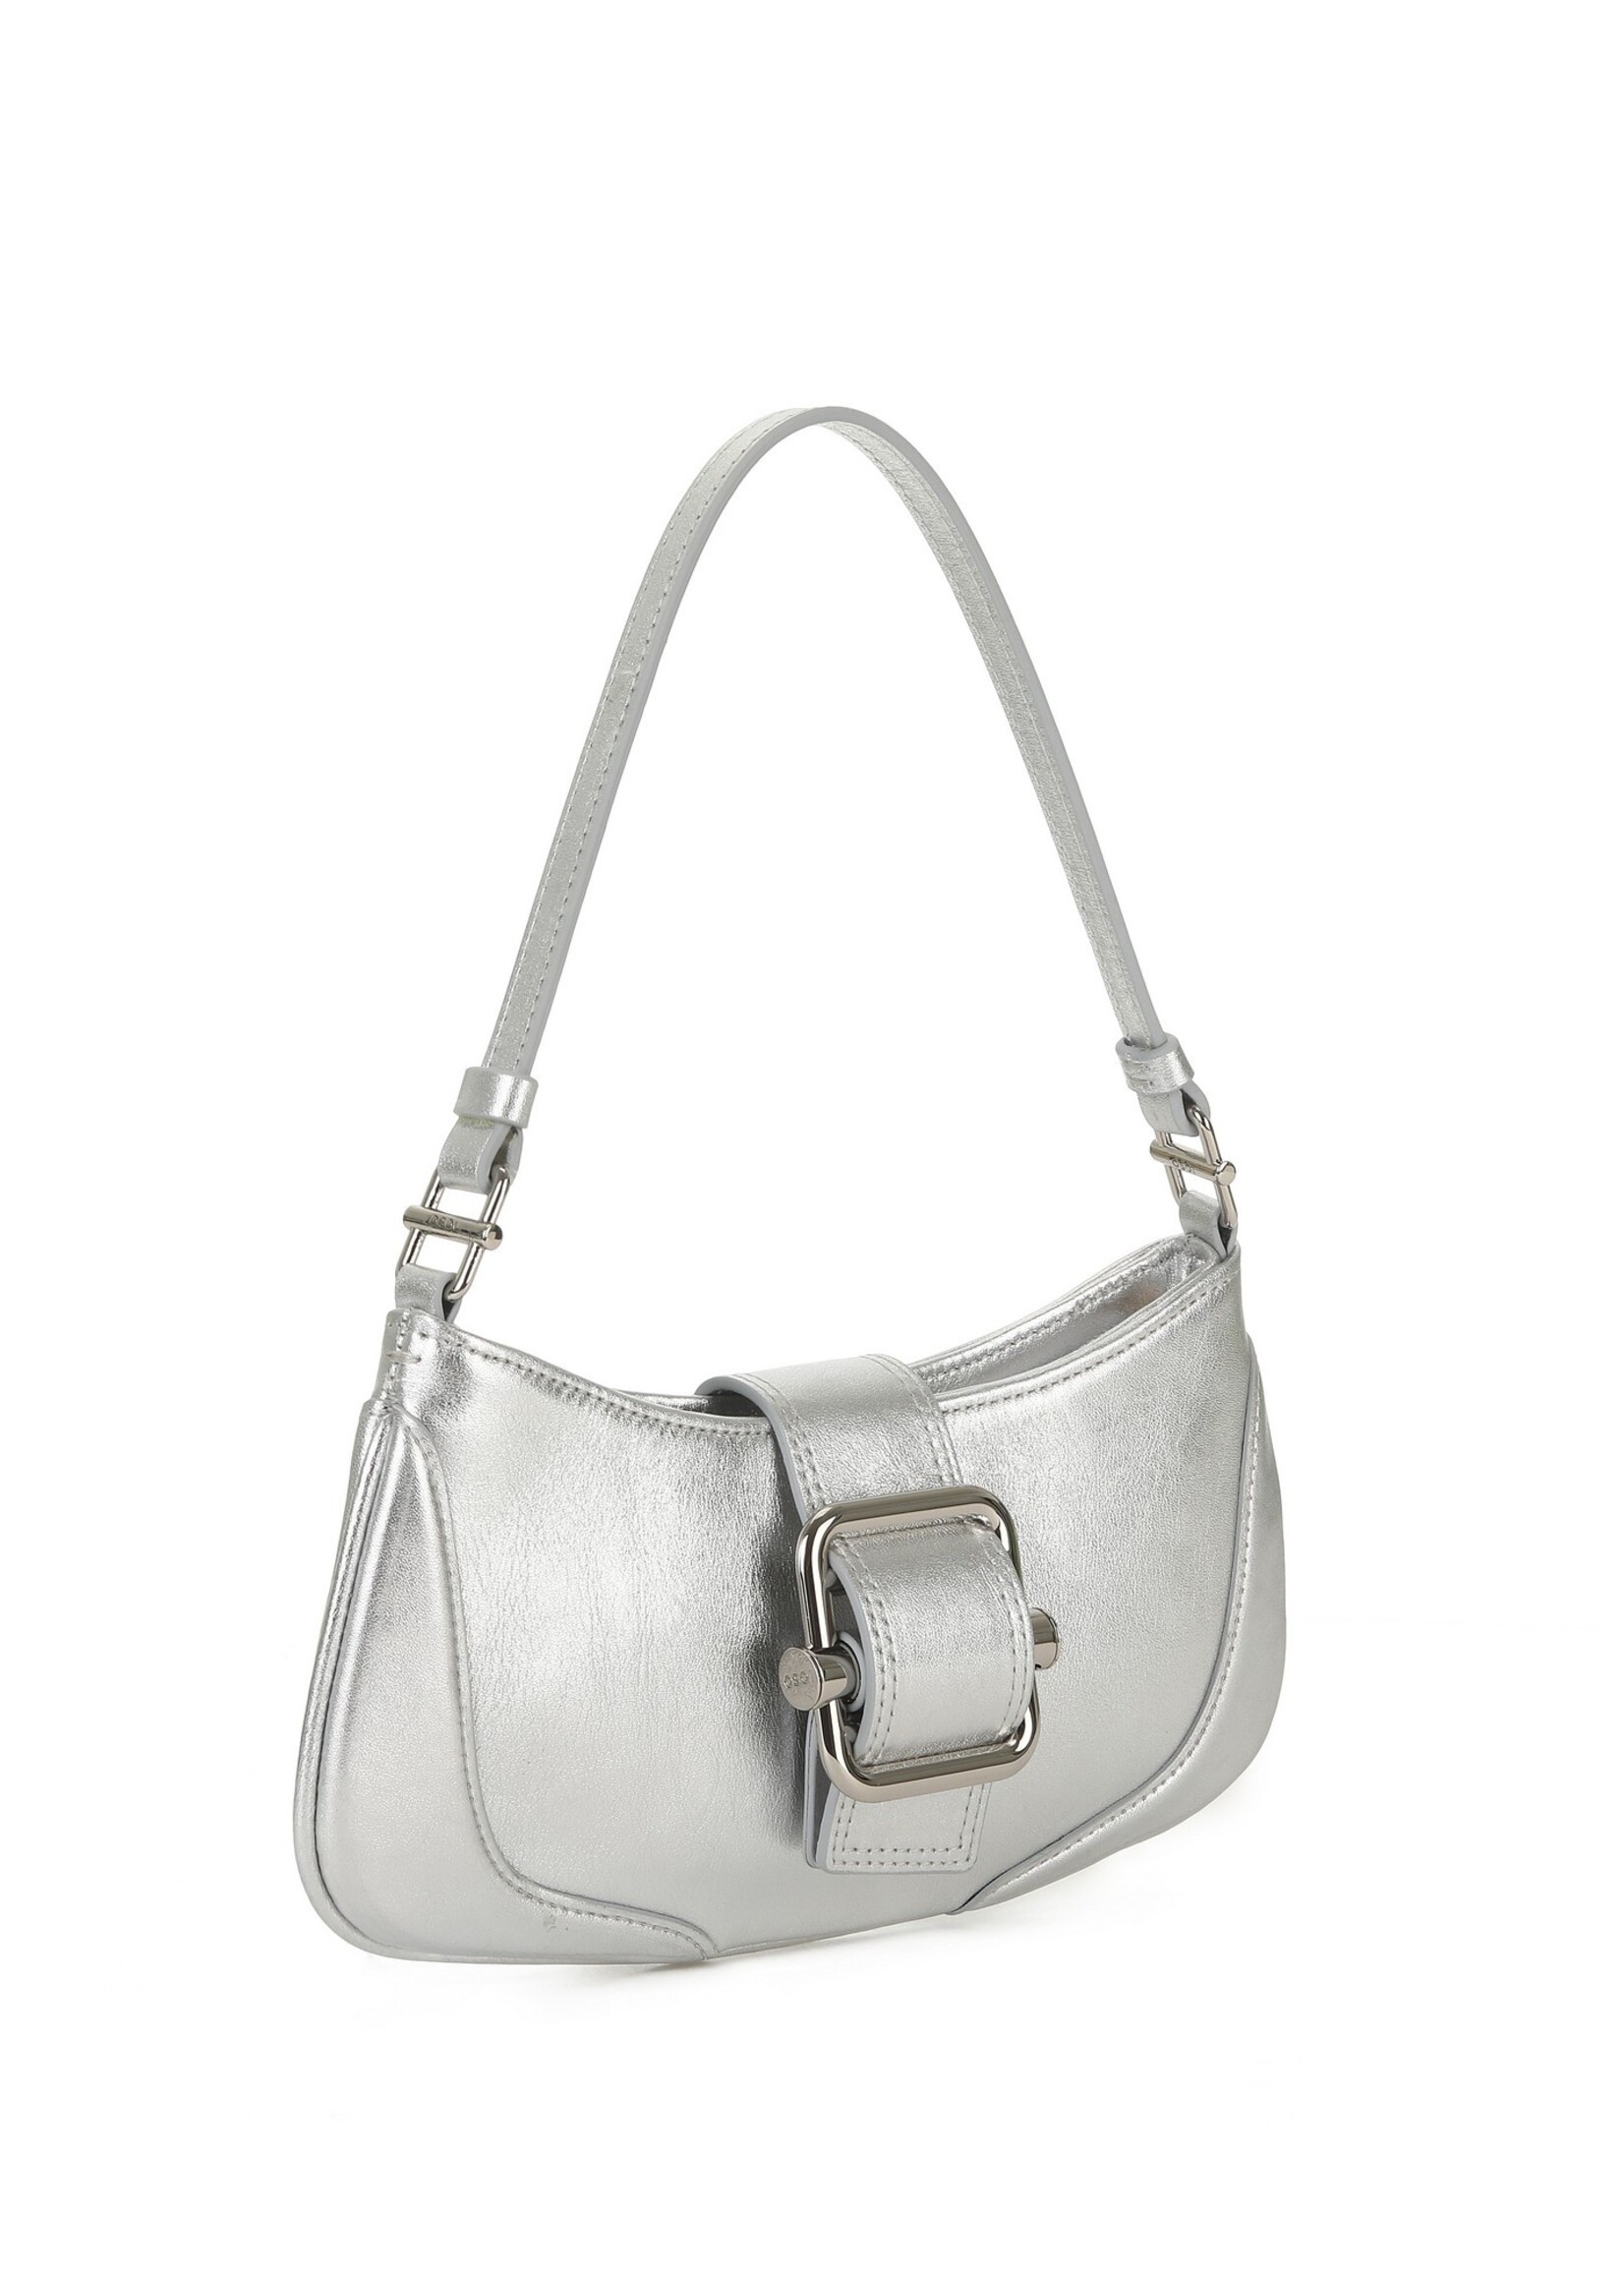 OSOI Small Shoulder Brocle Bag in Silver Leather